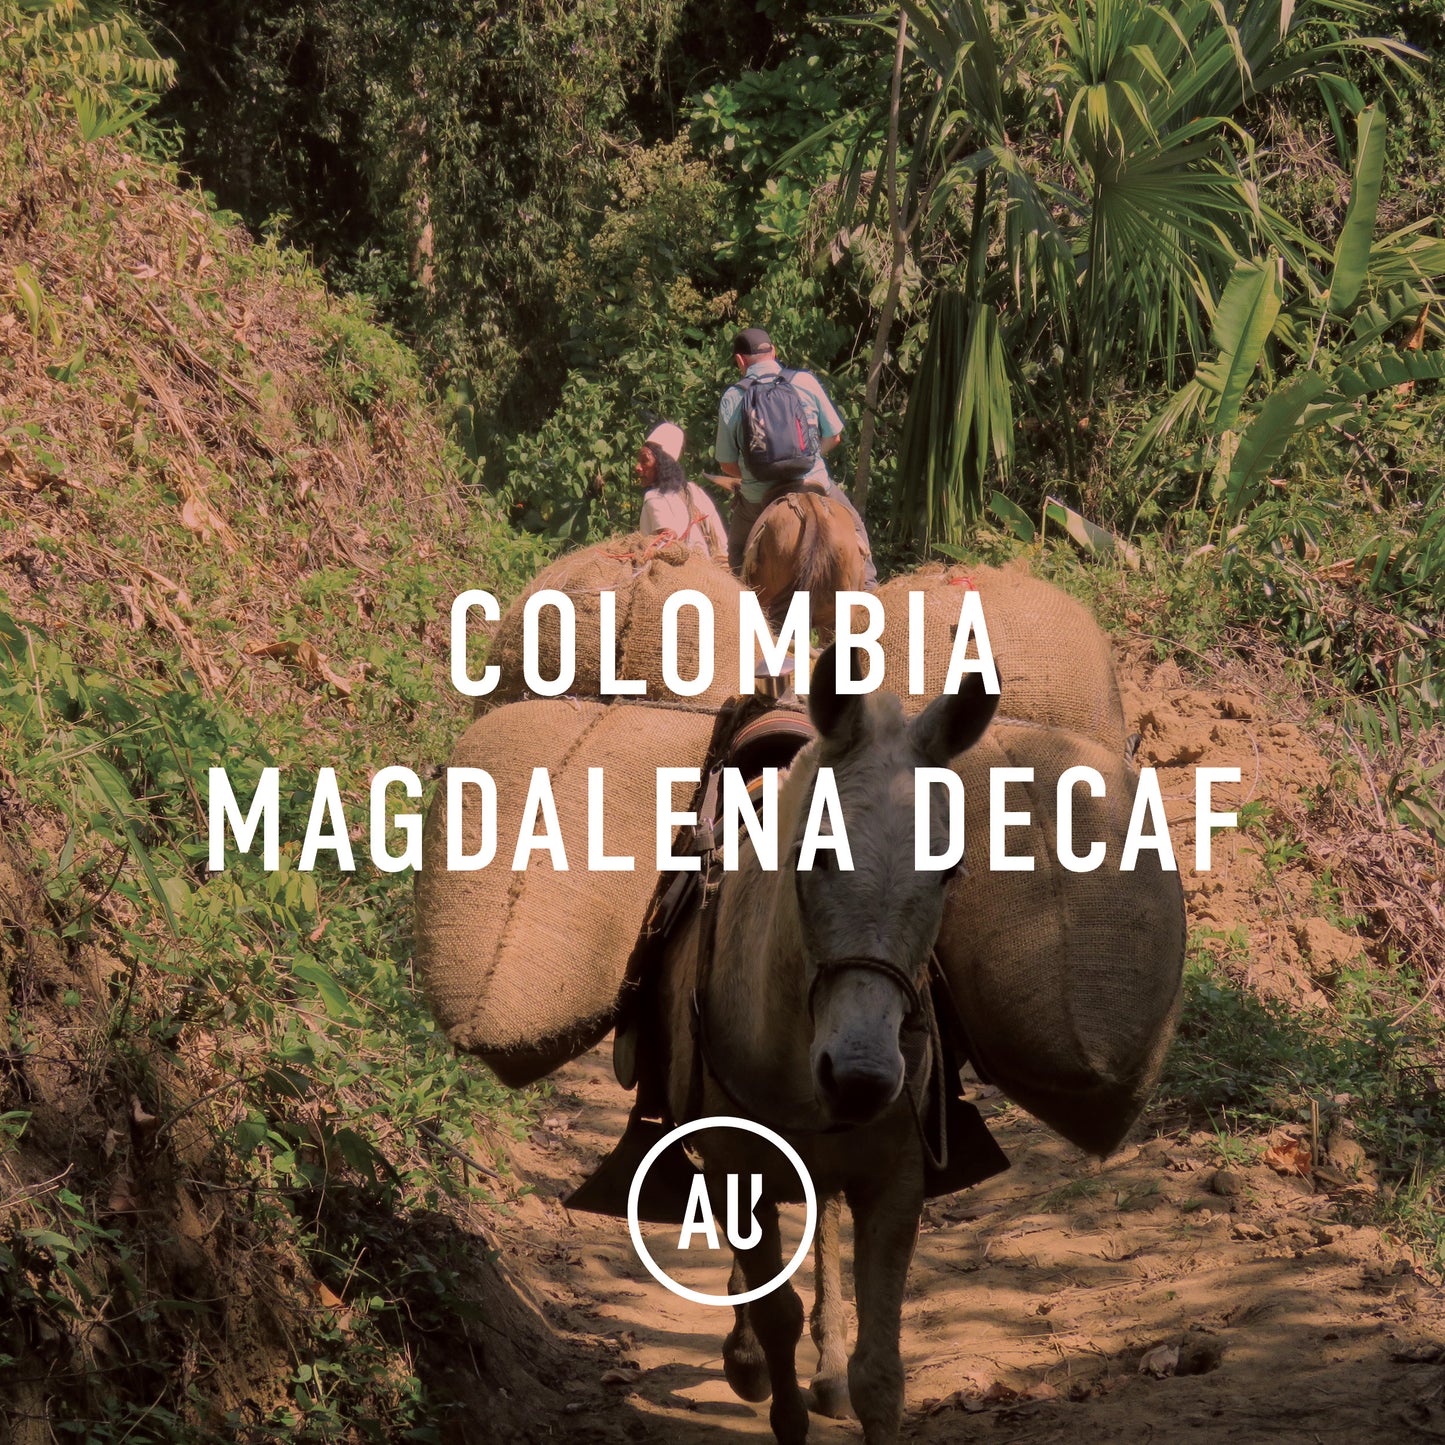 Colombia Magdalena Decaf